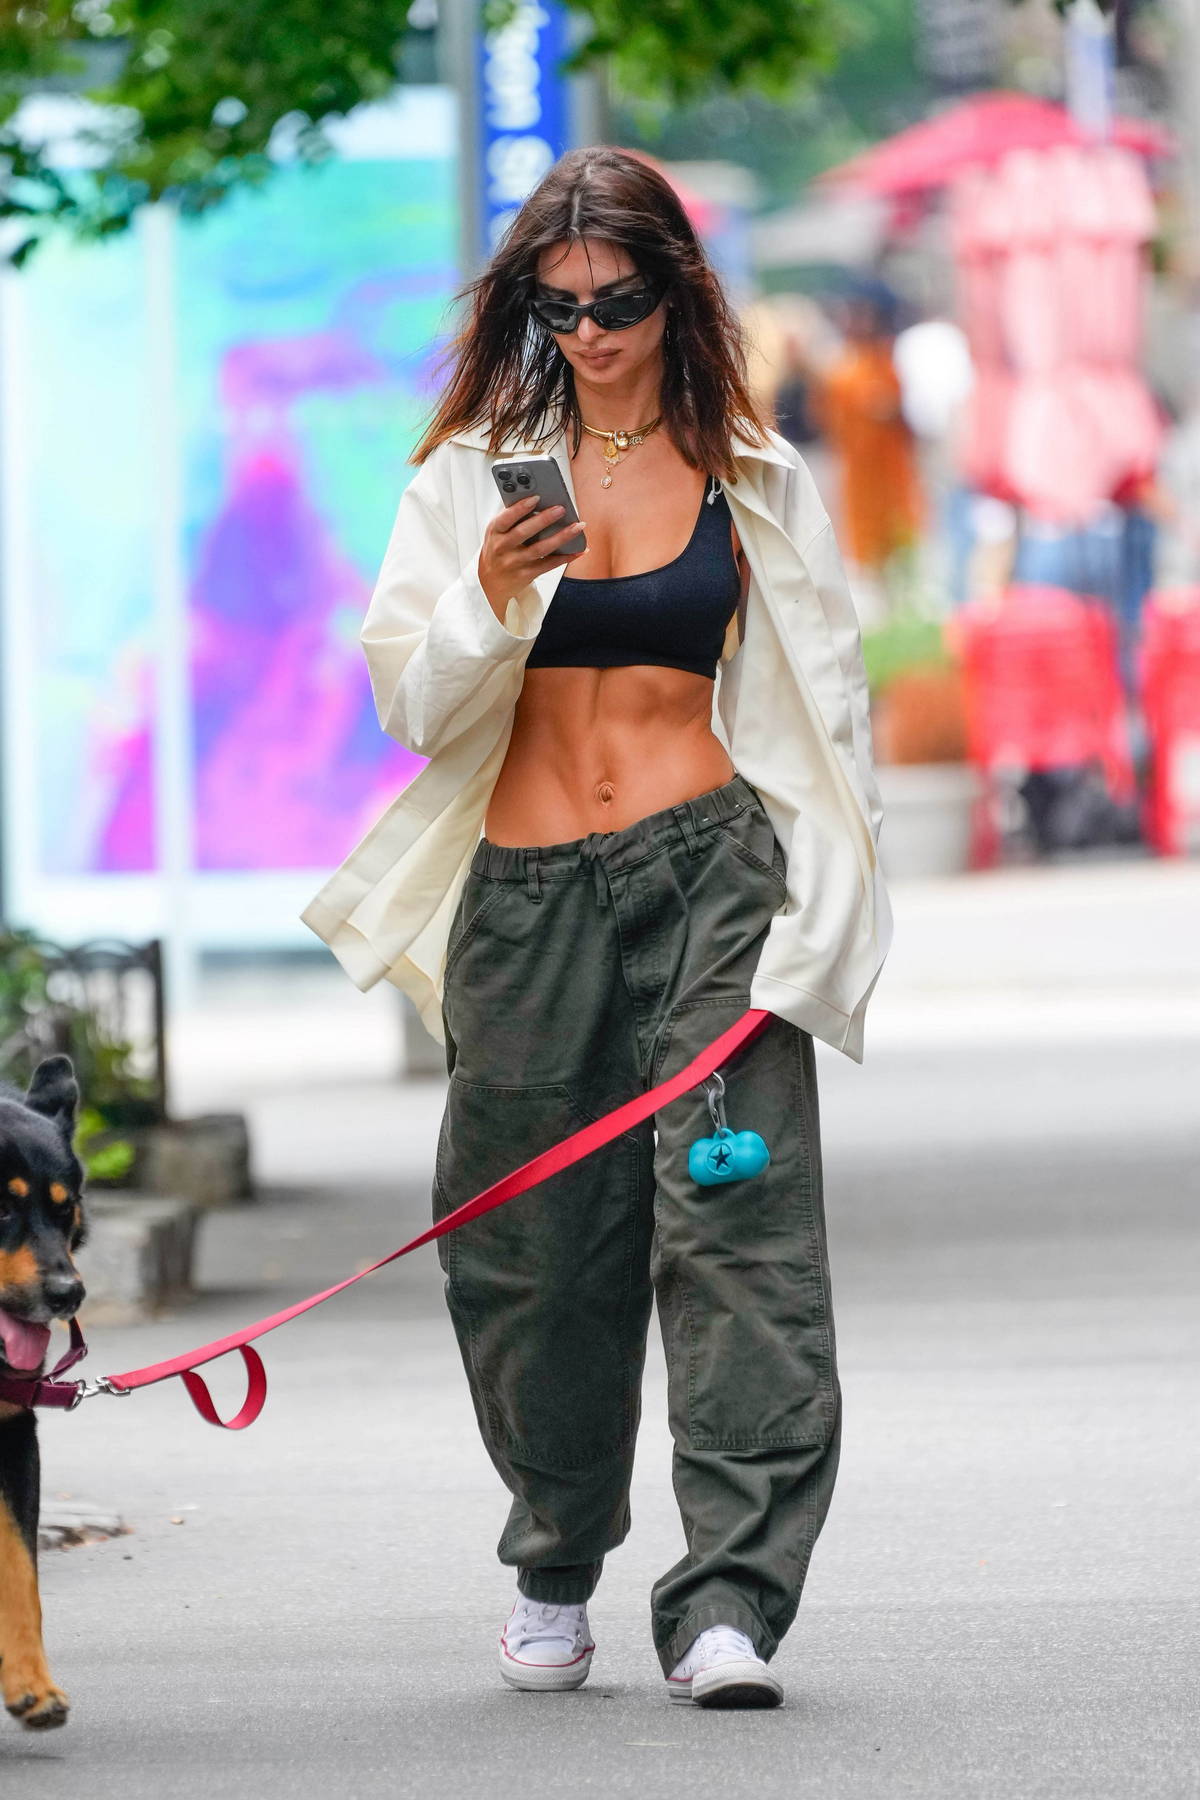 Emily Ratajkowski shows off her toned midriff in a black sports bra and cargo pants while out walking her dog in New York City